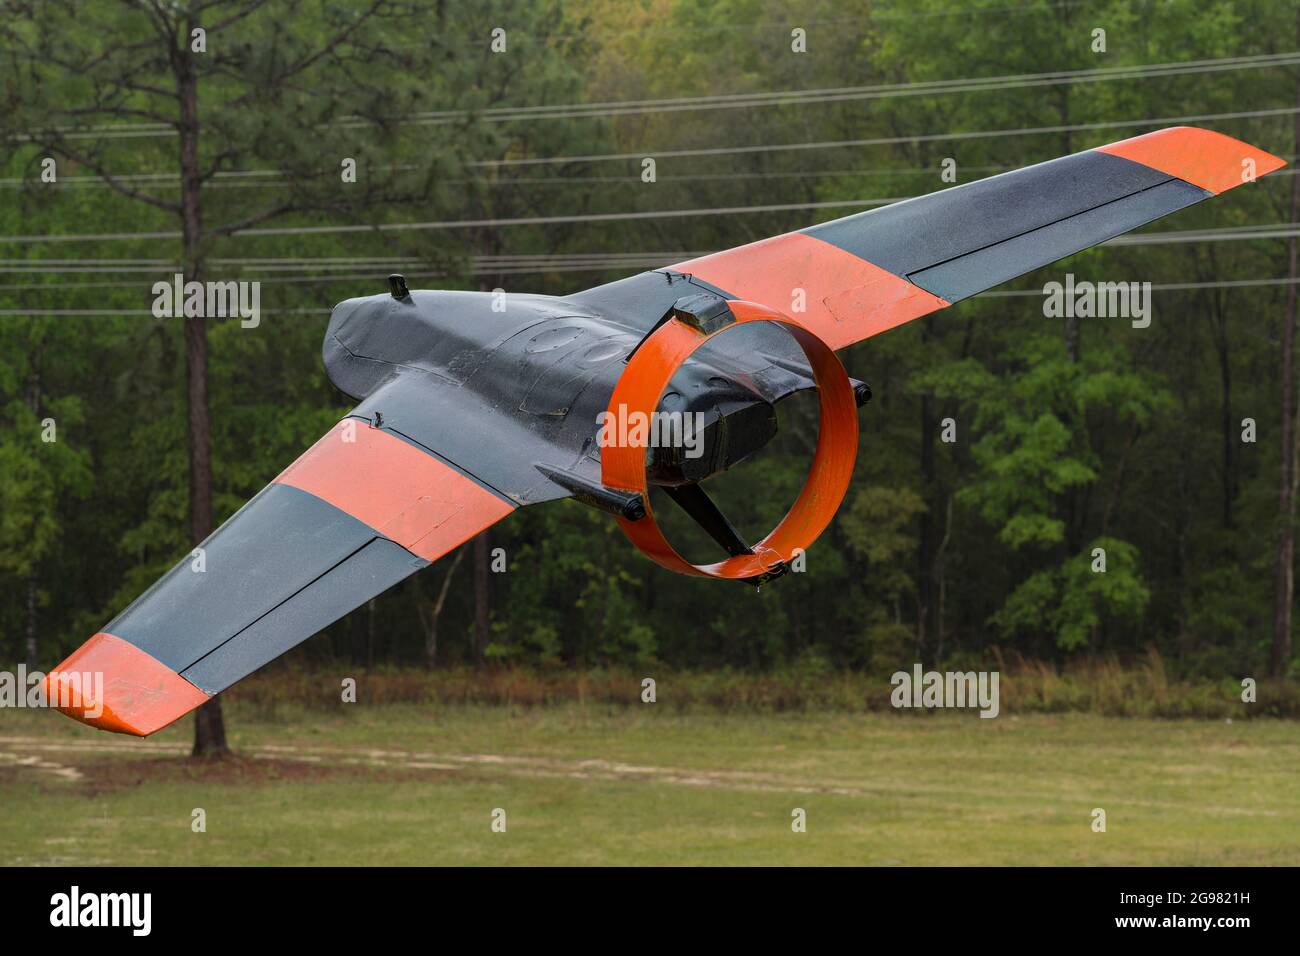 MQM-105 Aquila, Unmanned Aerial Vehicle at Air Force Armament Museum, Eglin Air Force base, Florida, USA Foto Stock